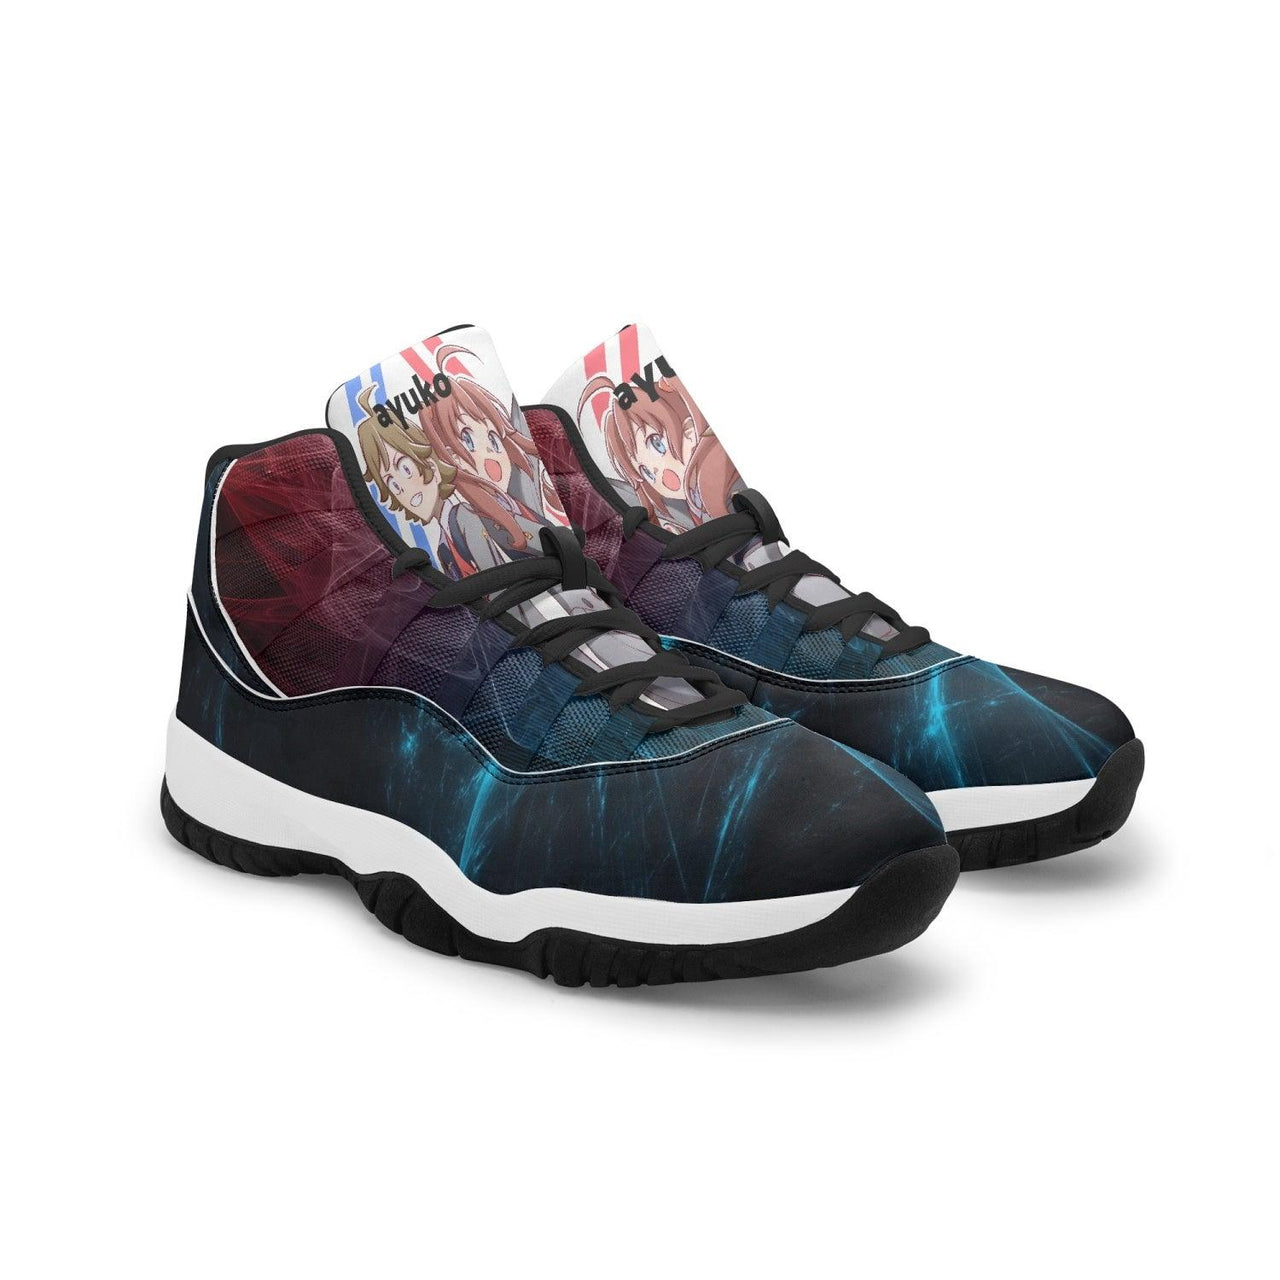 Darling in The Franxx Zorome JD11 Anime Shoes _ Darling in The Franxx _ Ayuko